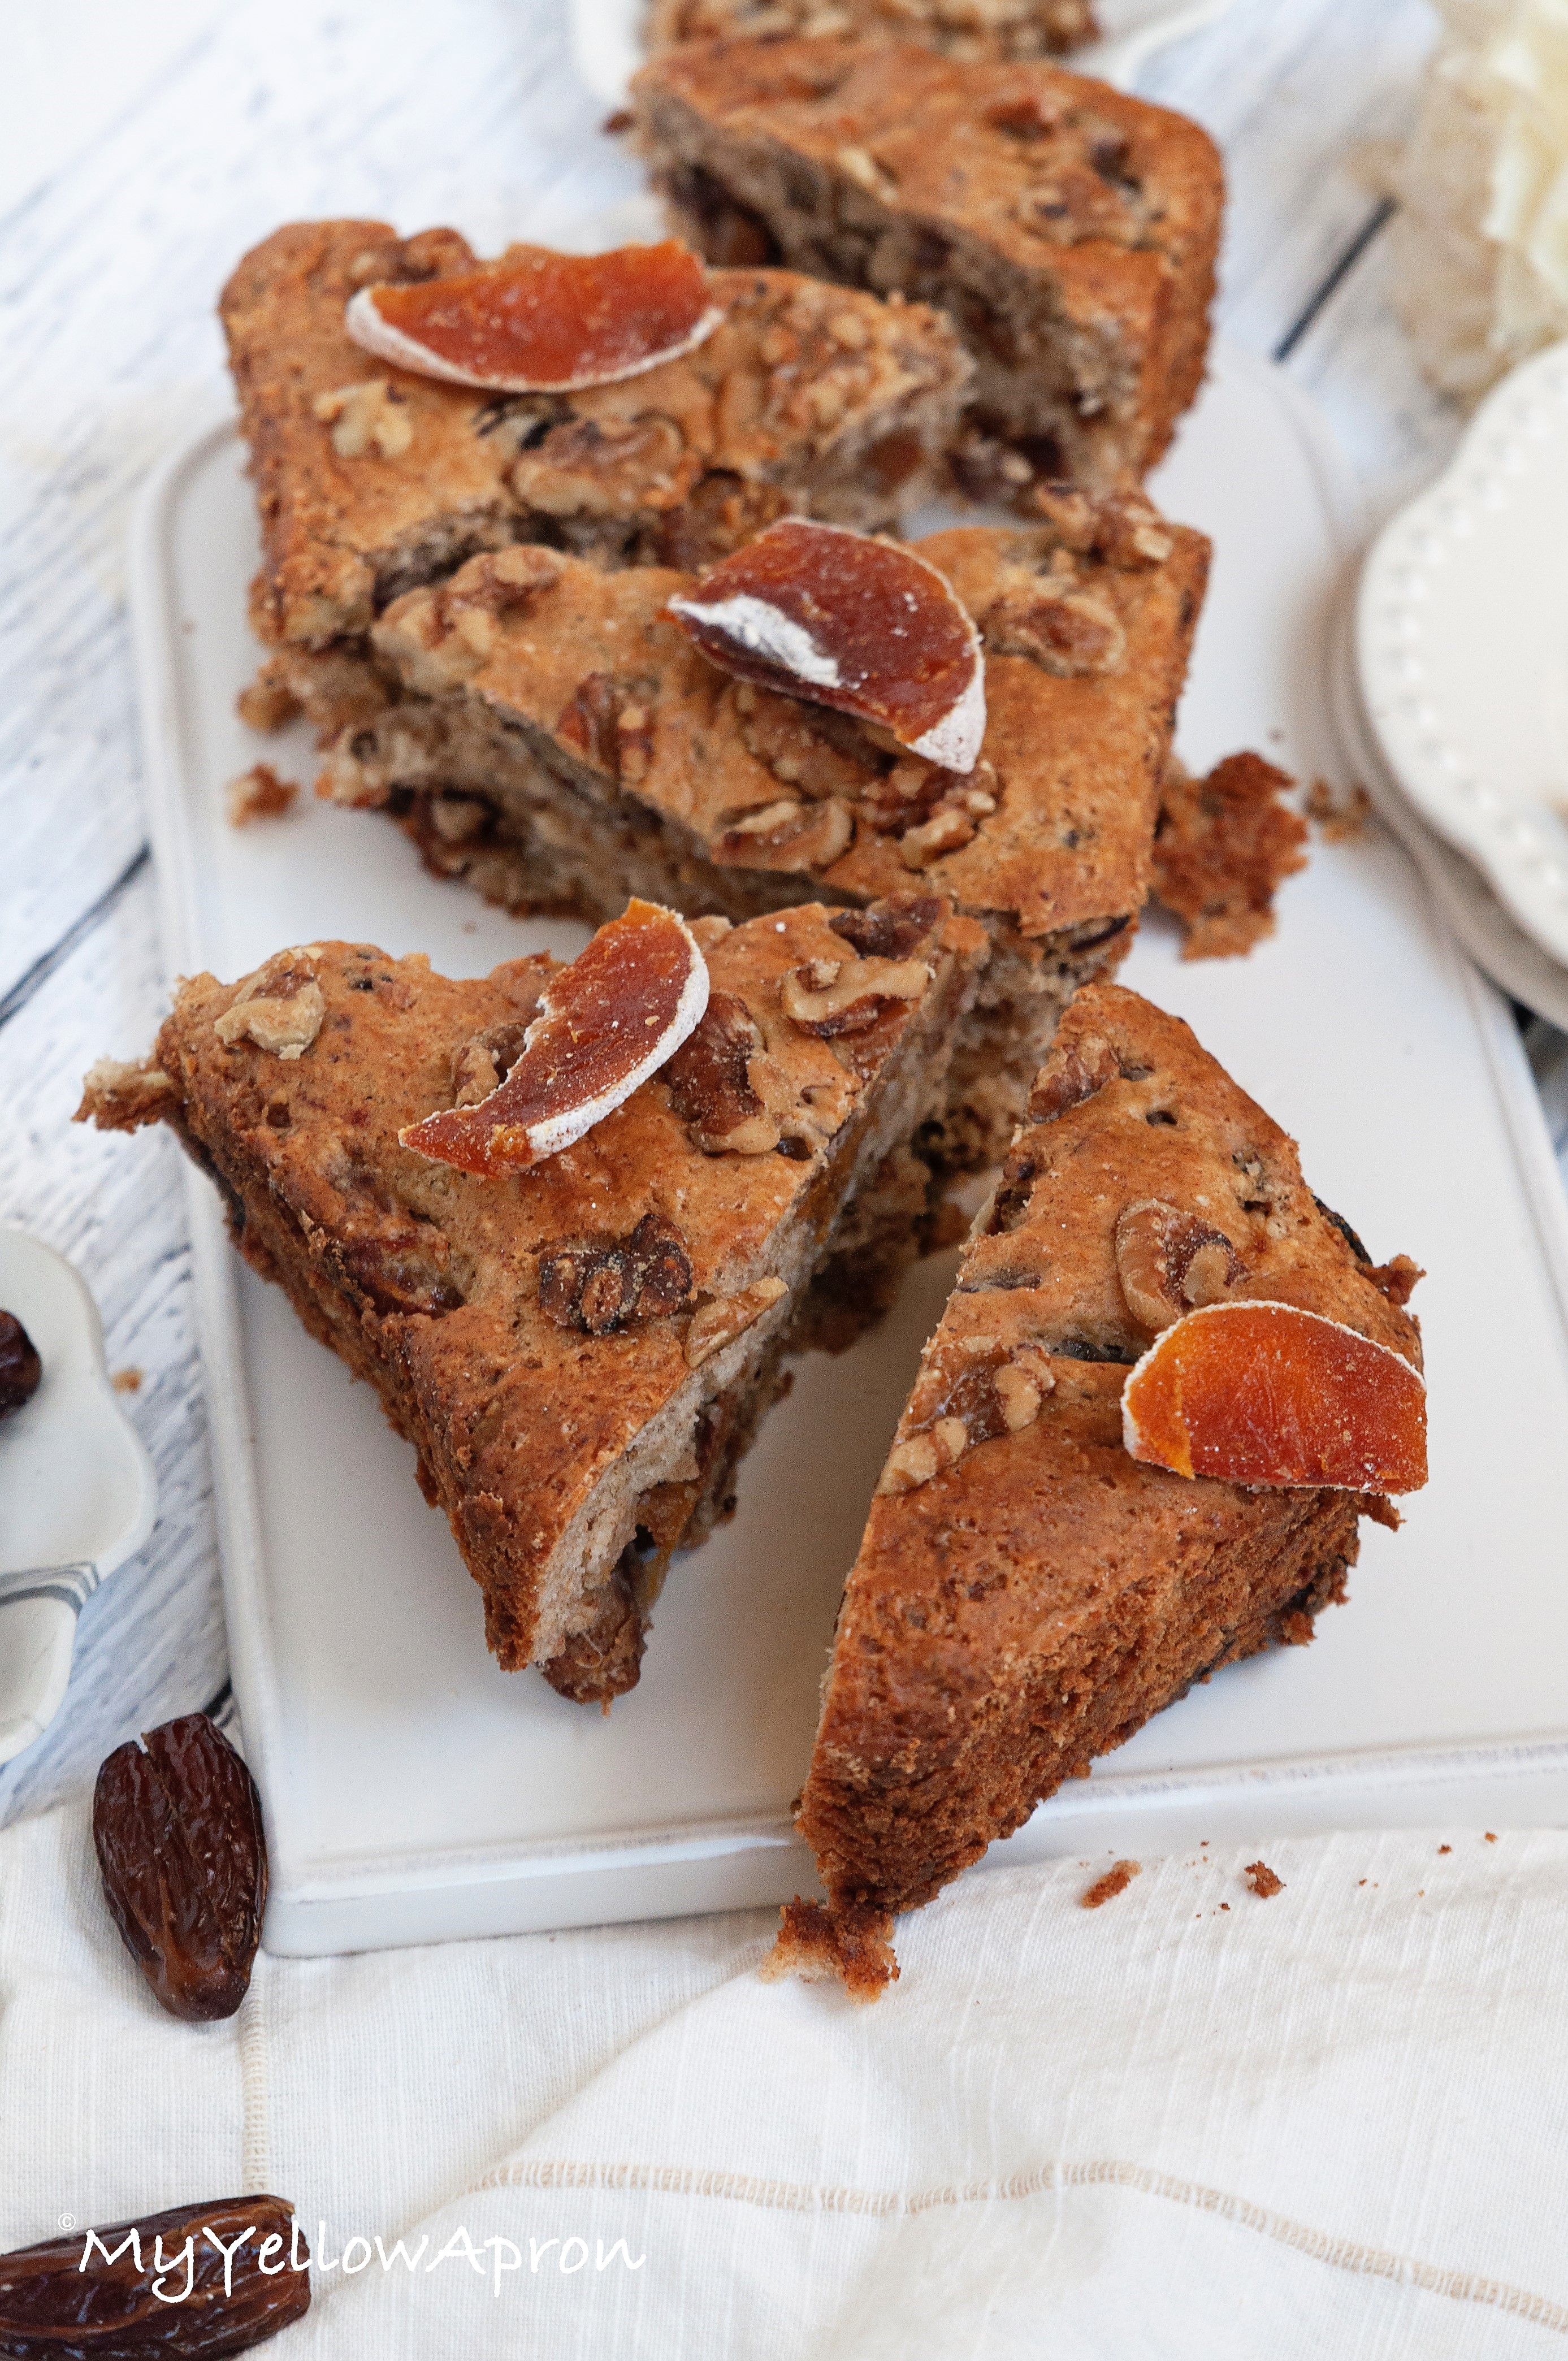 This eggless date and persimmon coffee cake is an one-bowl, rich and dense cake filled with sweet persimmon bites, chopped dates topped, and topped with walnuts.